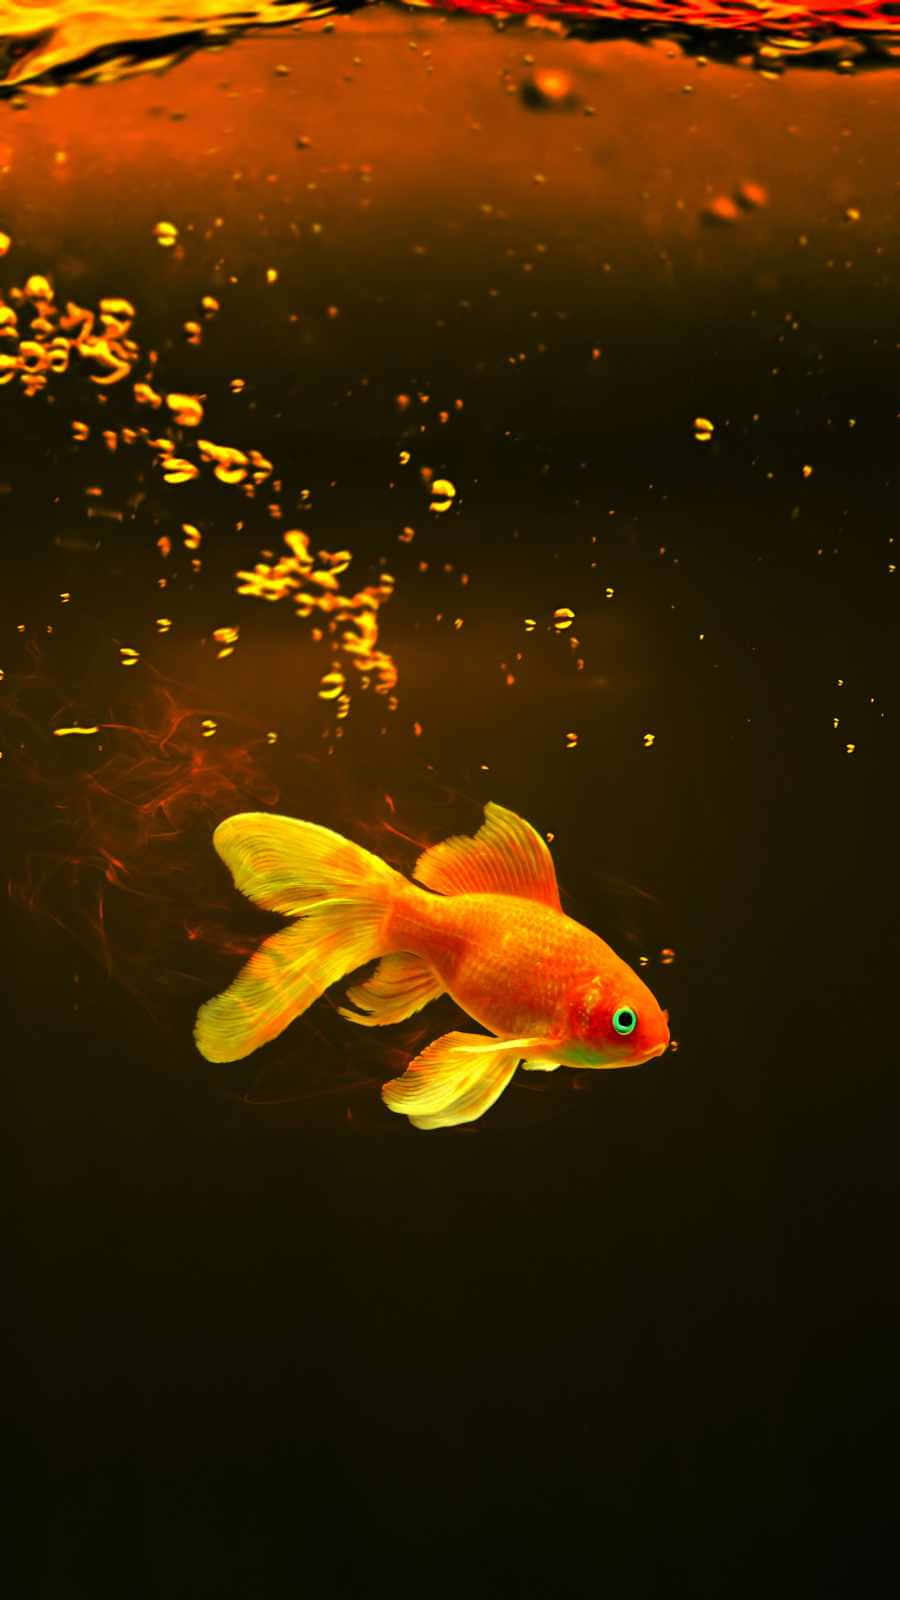 Enjoy the serenity of an aquarium with your iPhone Wallpaper